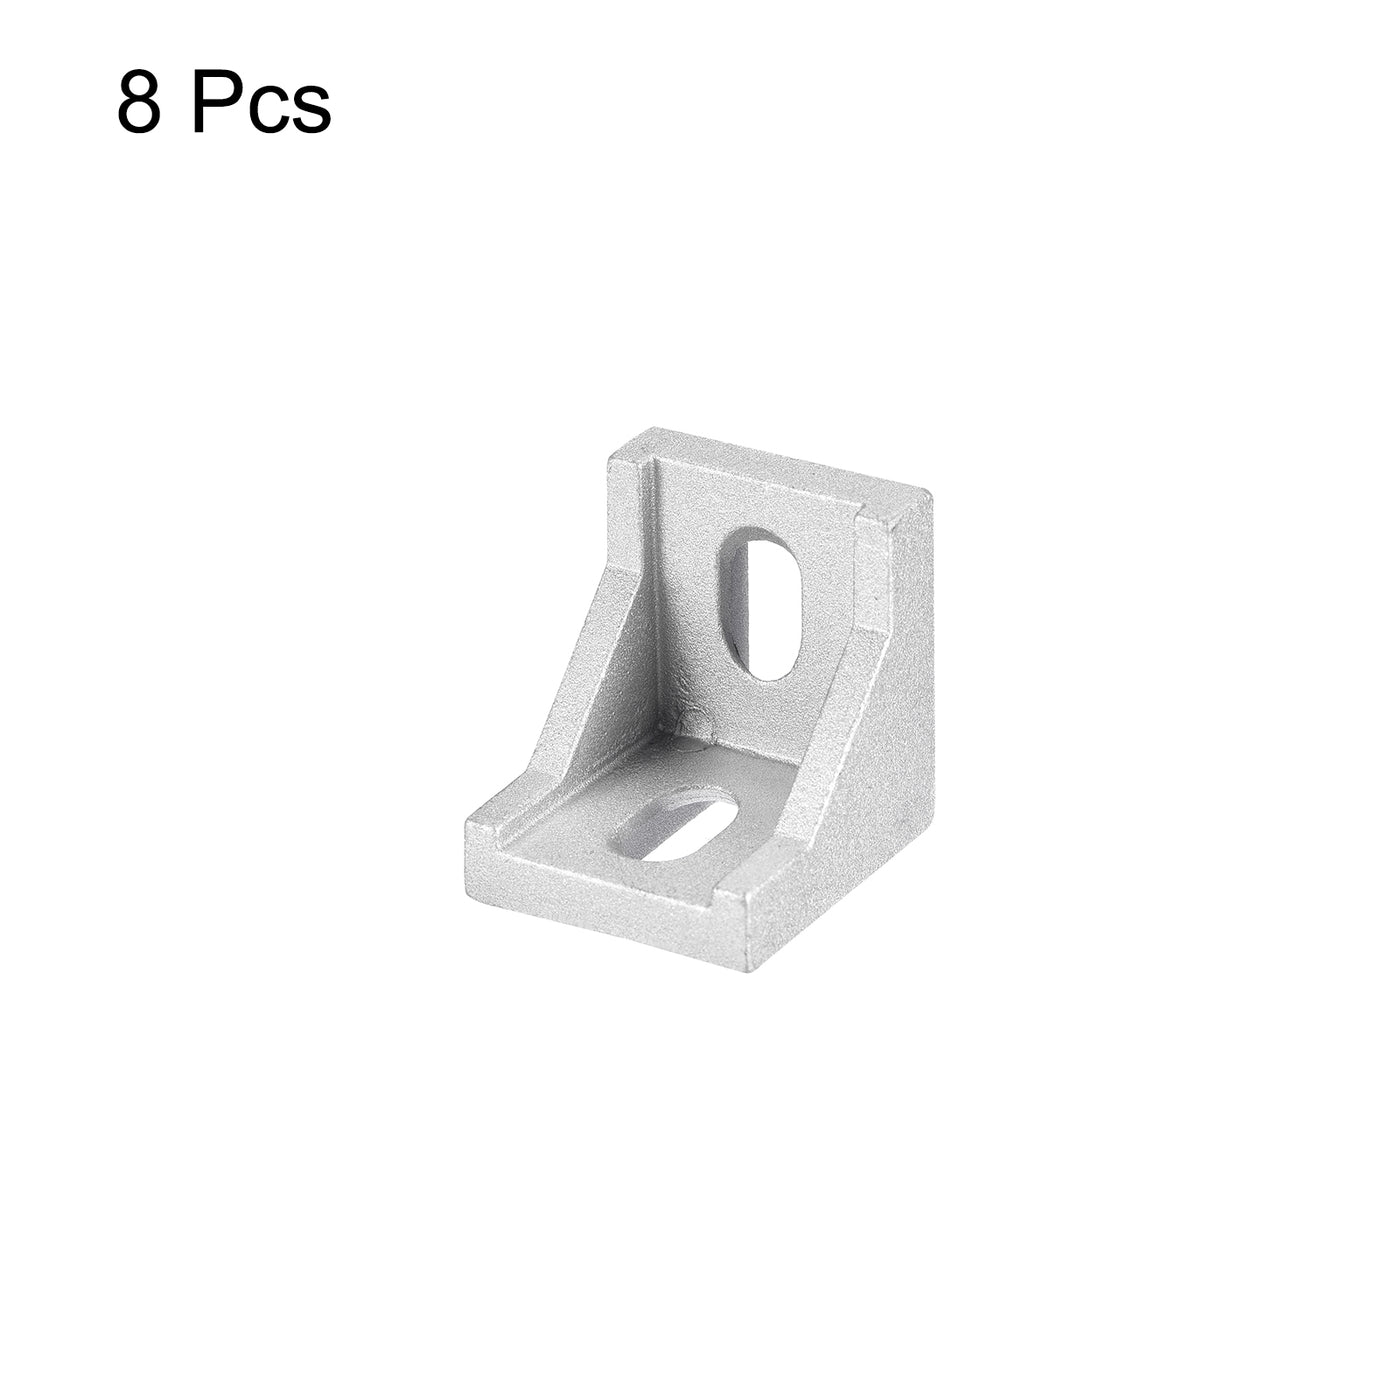 uxcell Uxcell 8Pcs Inside Corner Bracket Gusset, 38x38x35mm 4040 Thicken Angle Connectors for 4040/4080 Series Aluminum Extrusion Profile Silver